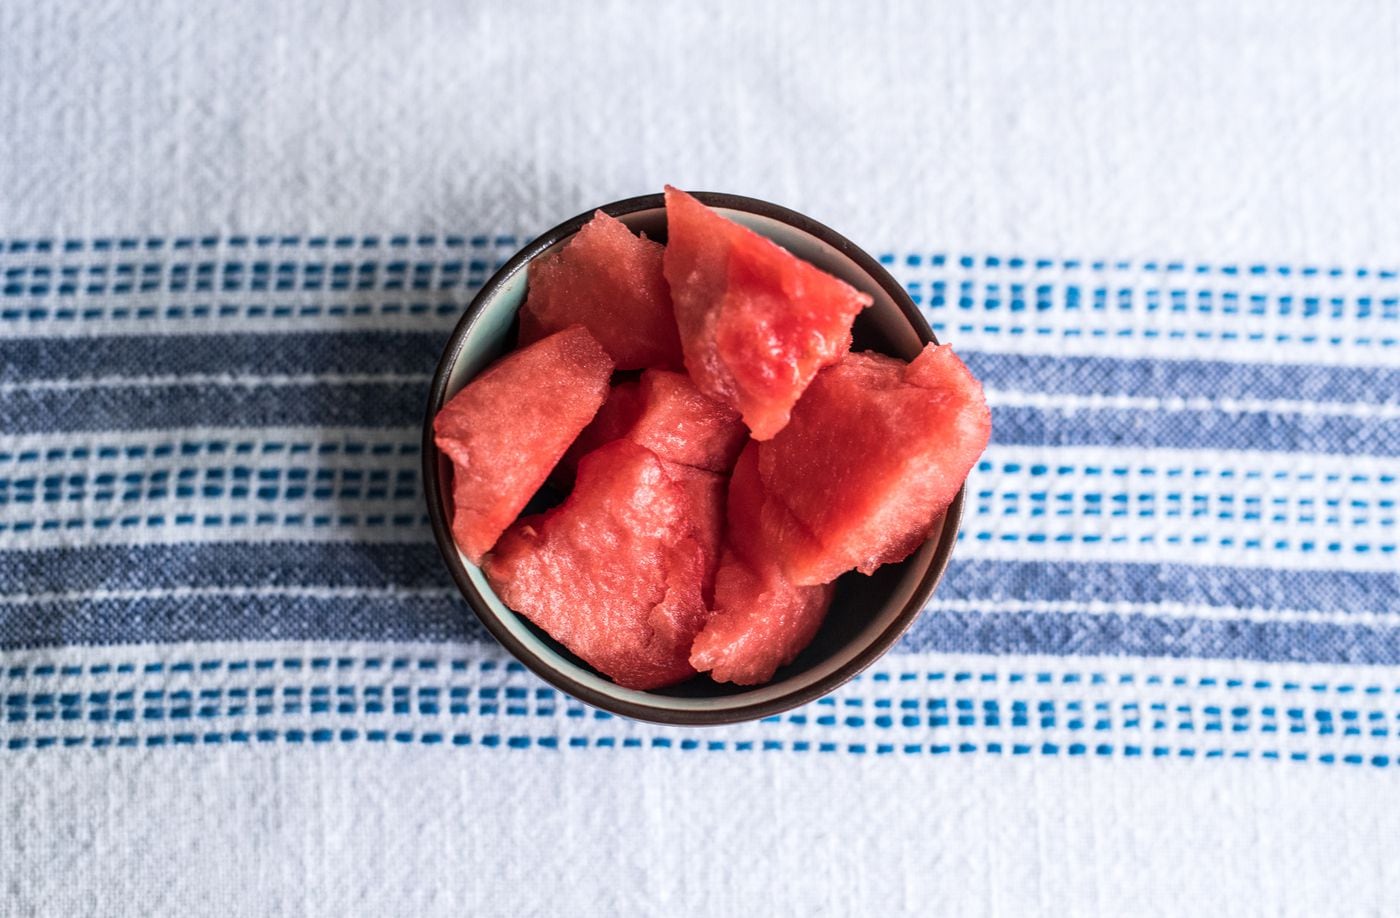 Like the juicy flesh, the seeds and rind of a watermelon can both be transformed into delicious and healthful snacks.